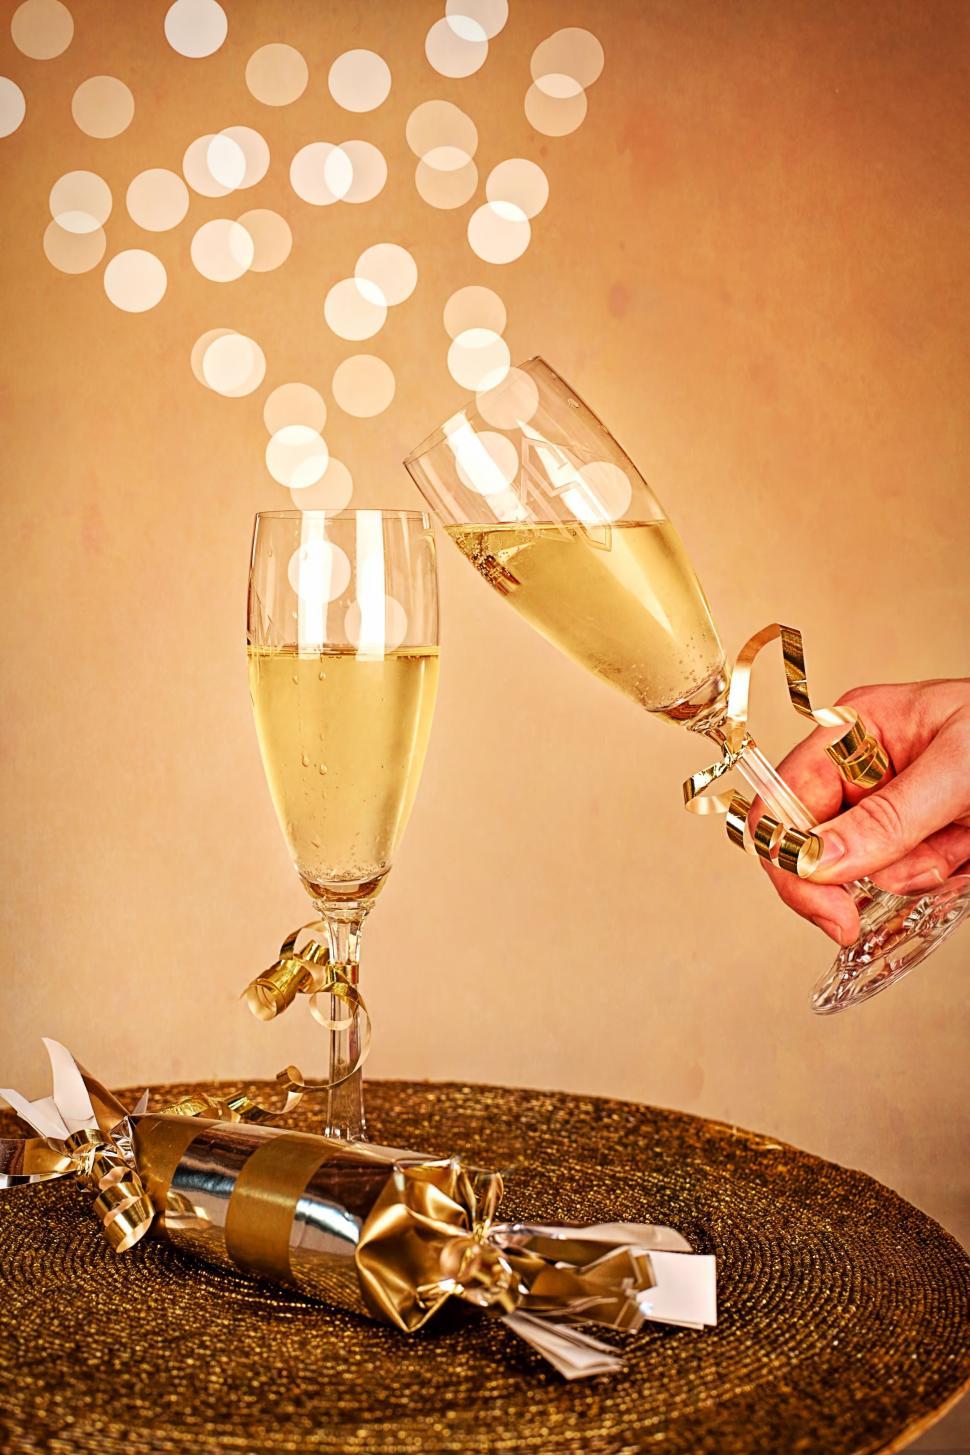 Free Image of Champagne glasses with bokeh lights  